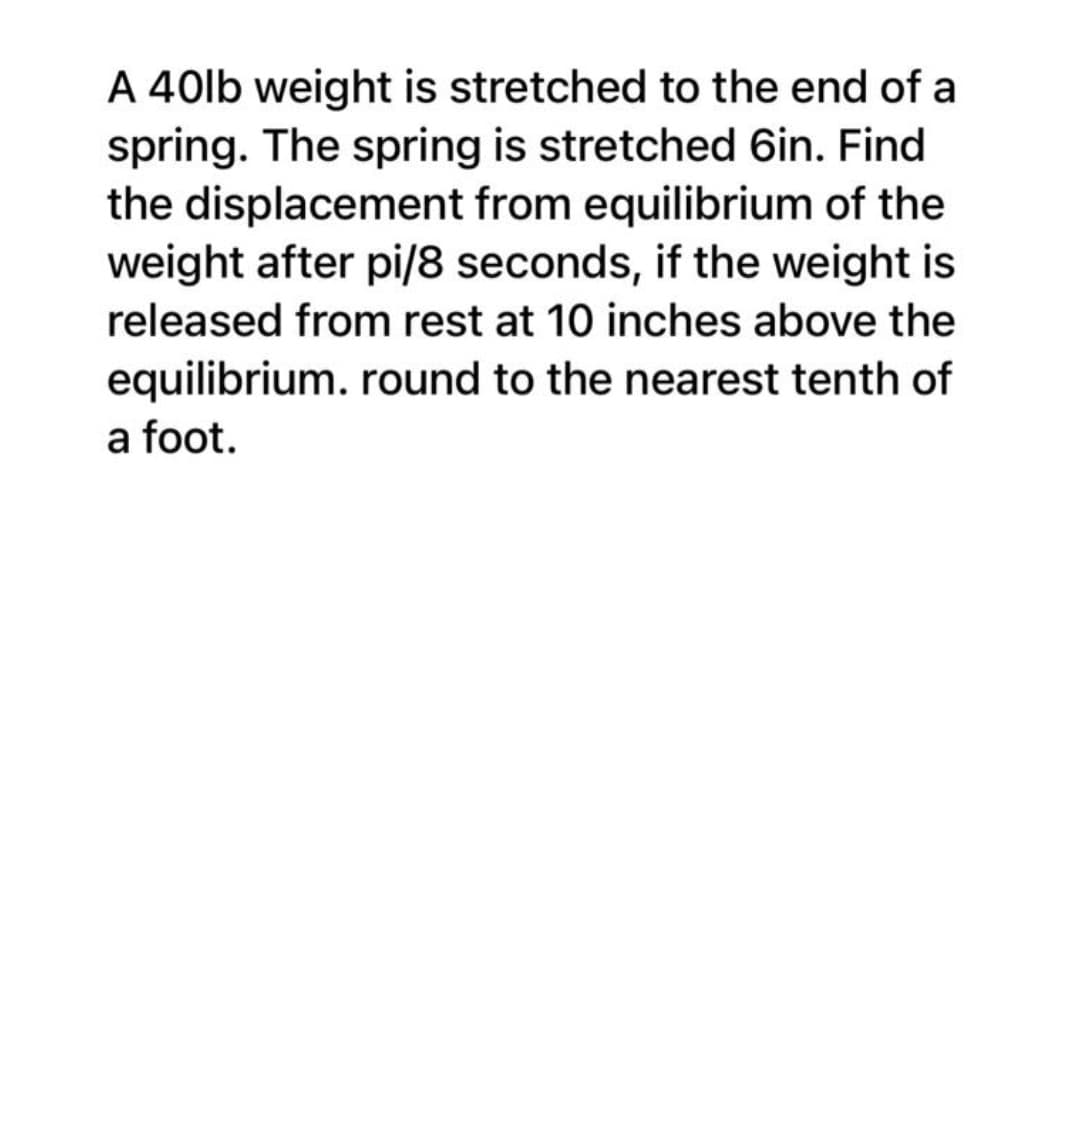 A 40lb weight is stretched to the end of a
spring. The spring is stretched 6in. Find
the displacement from equilibrium of the
weight after pi/8 seconds, if the weight is
released from rest at 10 inches above the
equilibrium. round to the nearest tenth of
a foot.
